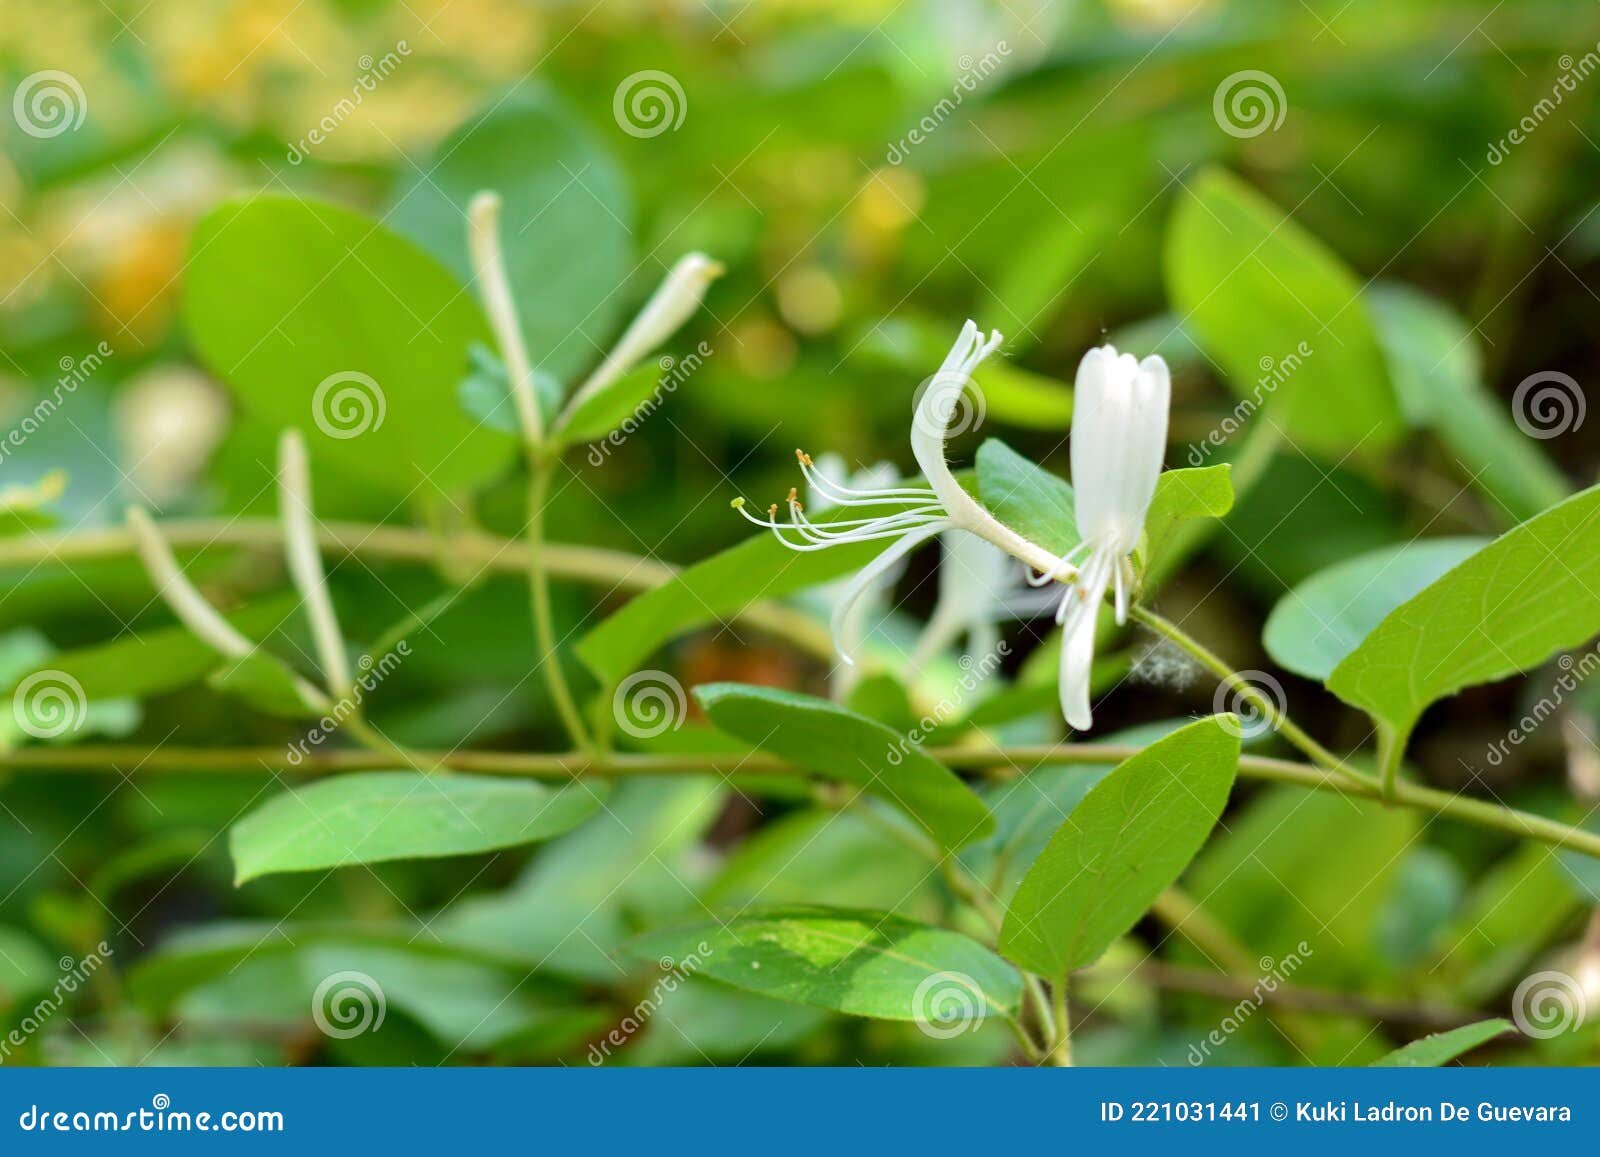 honeysuckle plant with white flowers